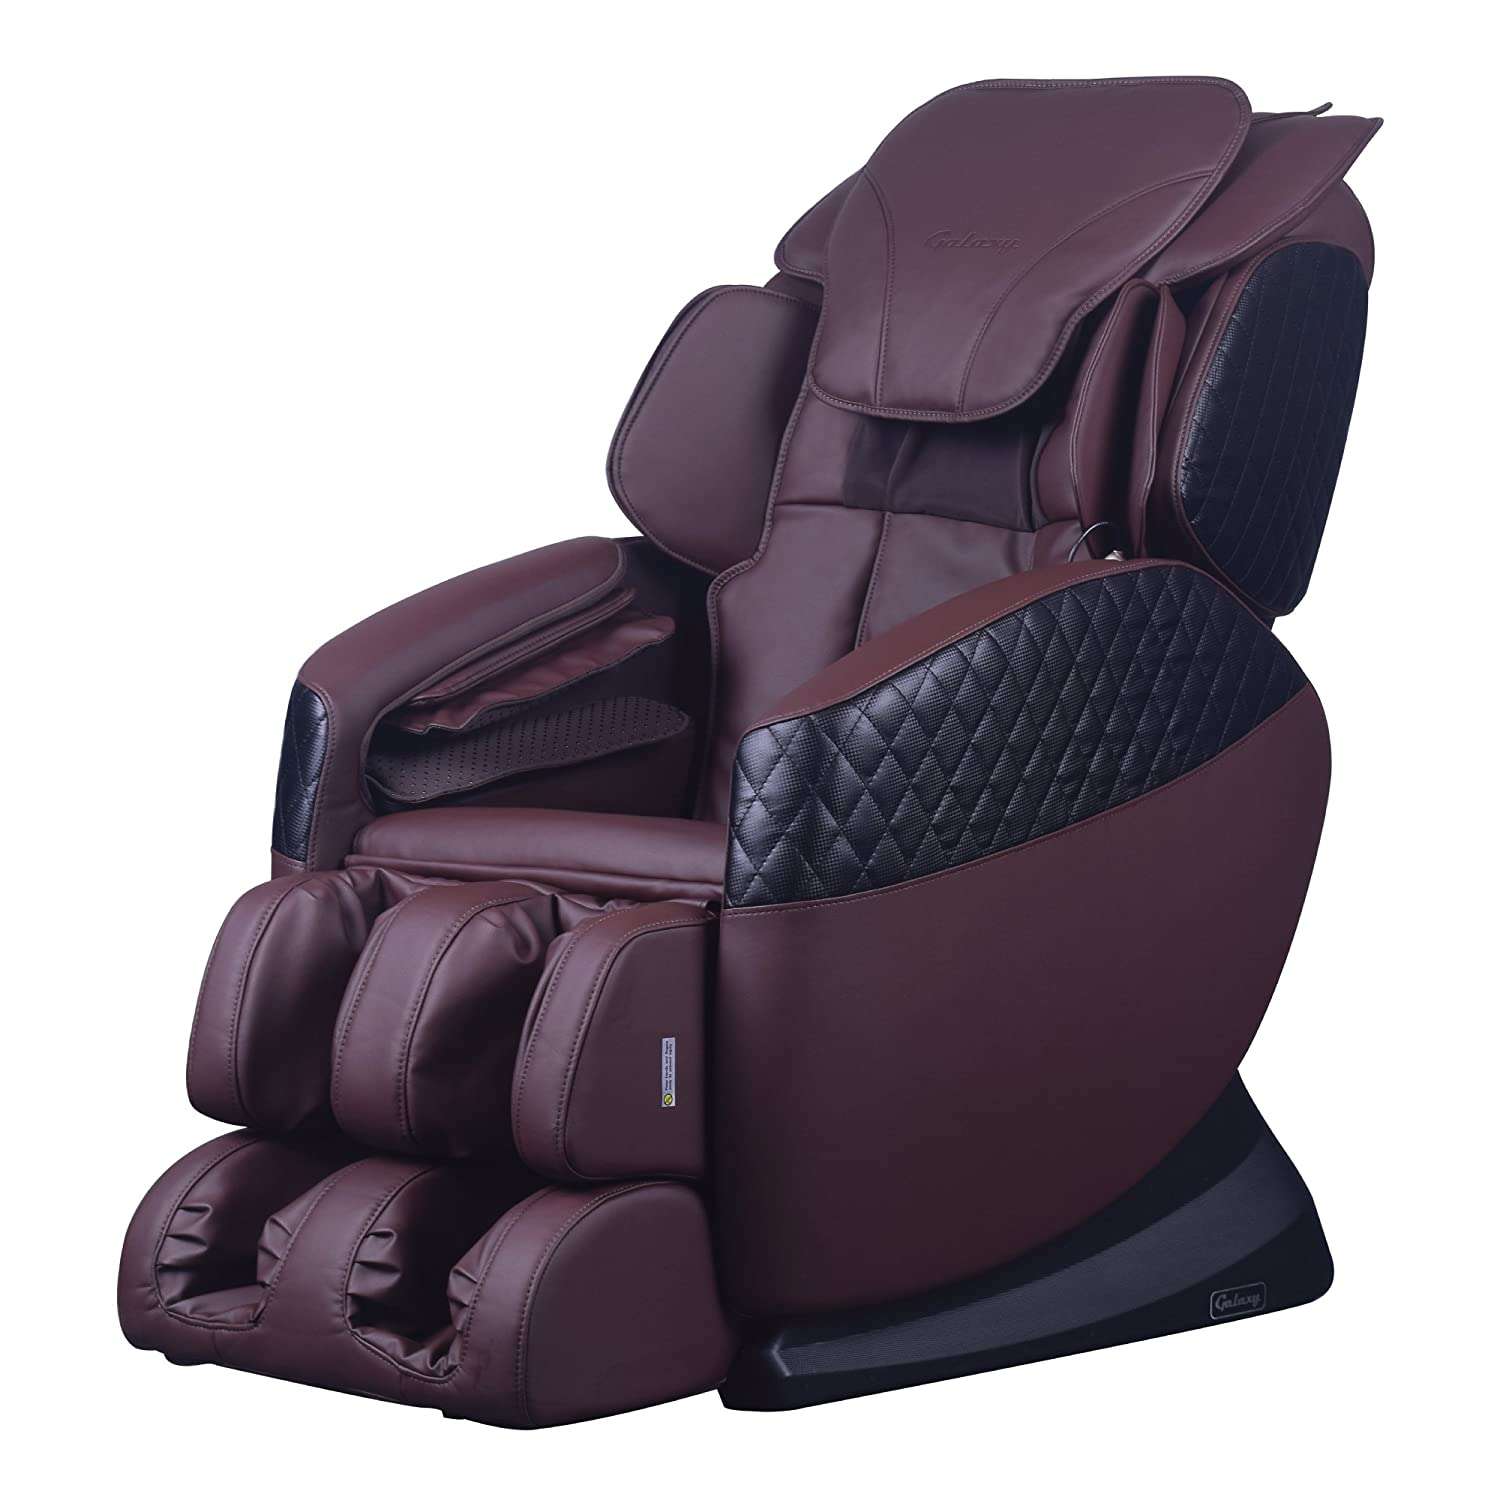 Galaxy EC 555 Massage Chair Reviews 2020 (read our in ...